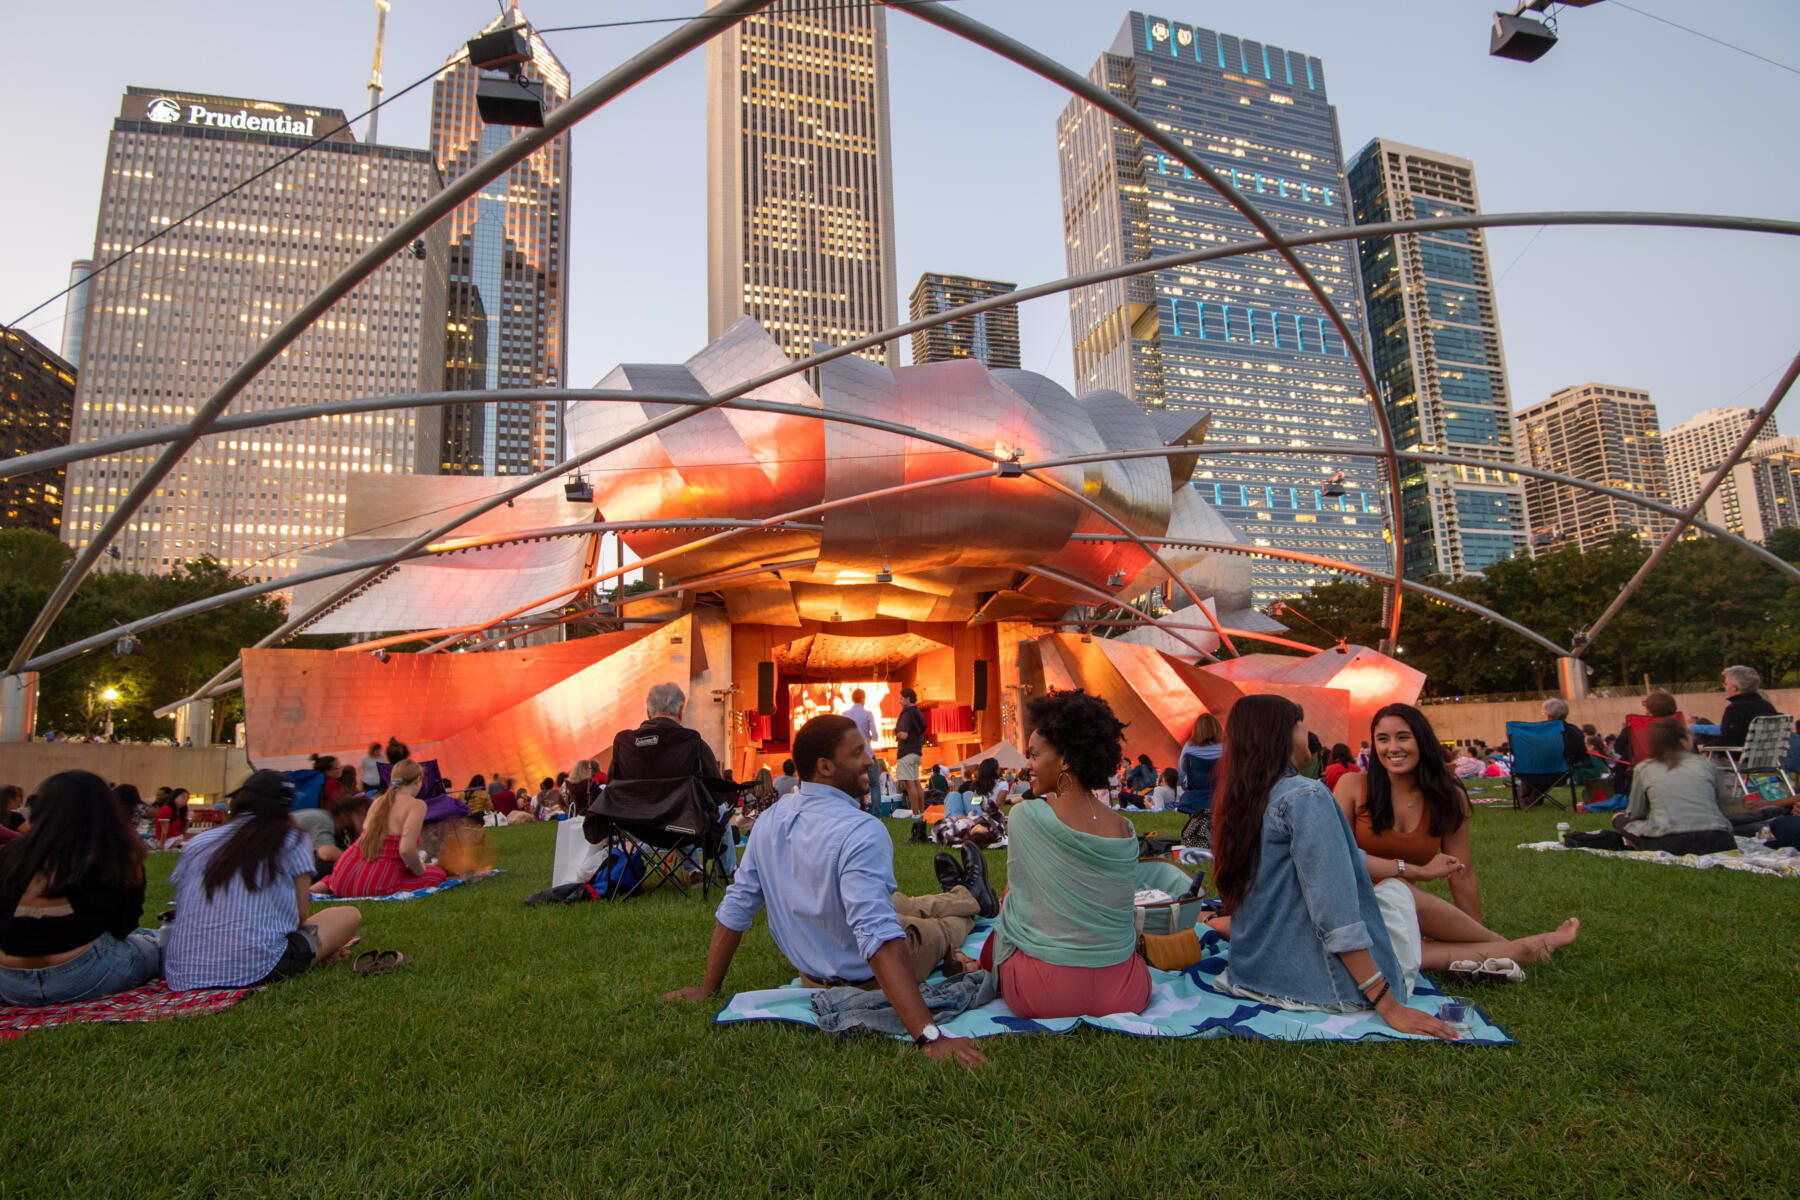 Chicago Events Calendar 2022 Chicago Festivals 2022 | Events Guide To Music Fests, Street Fairs, And More